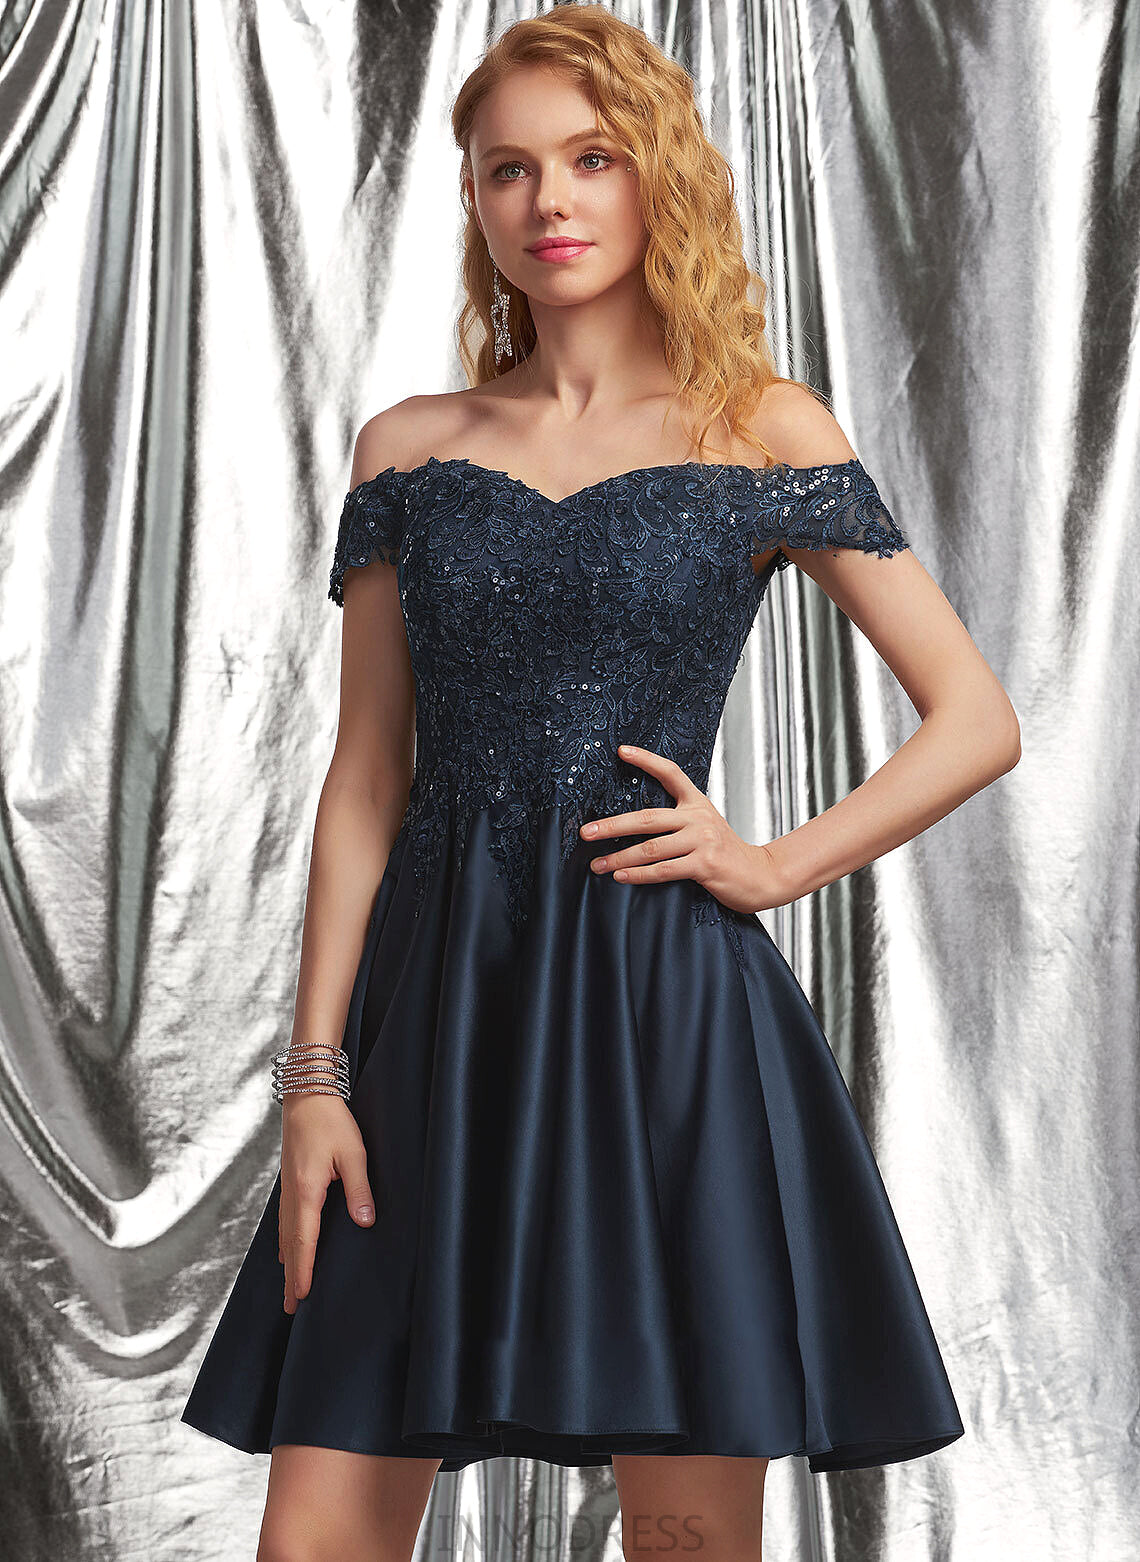 Prom Dresses Sequins With Satin Off-the-Shoulder Ana Lace Short/Mini A-Line